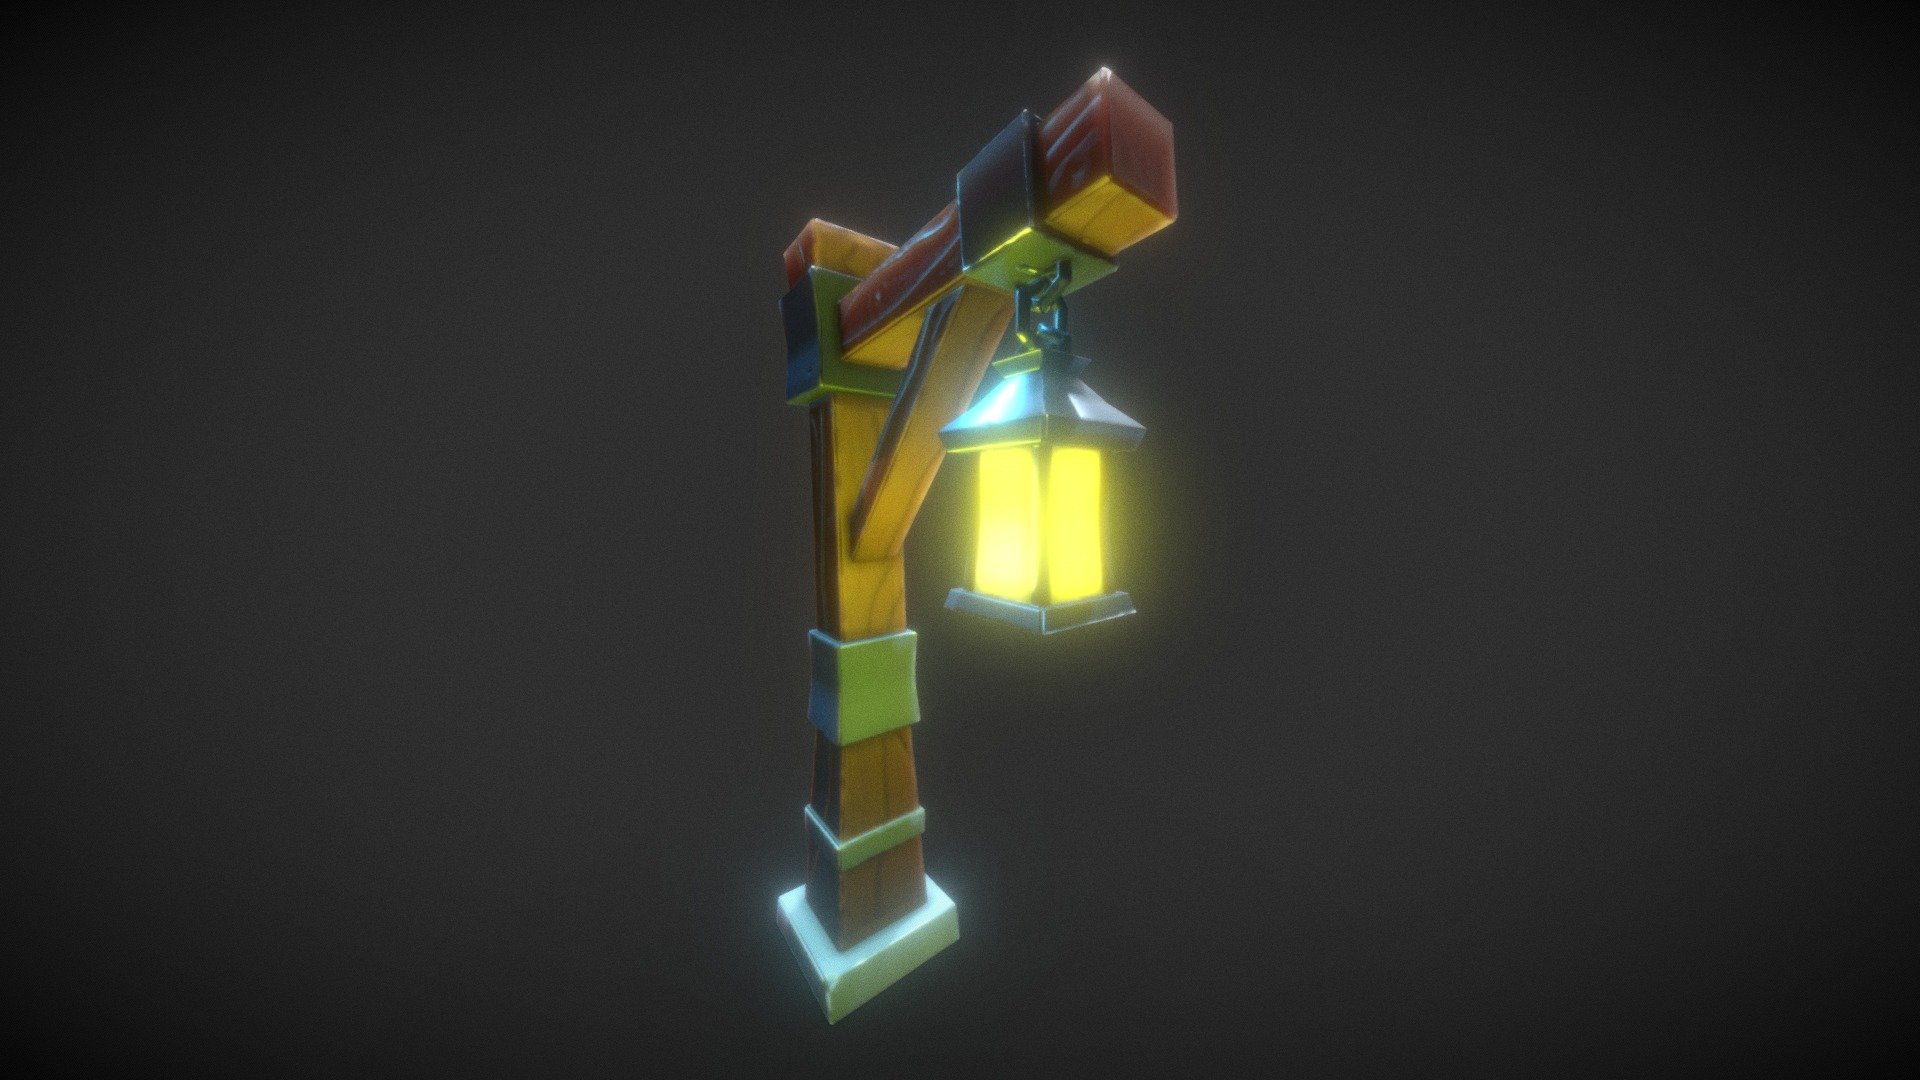 Stylized Lantern I made for practice 3d model